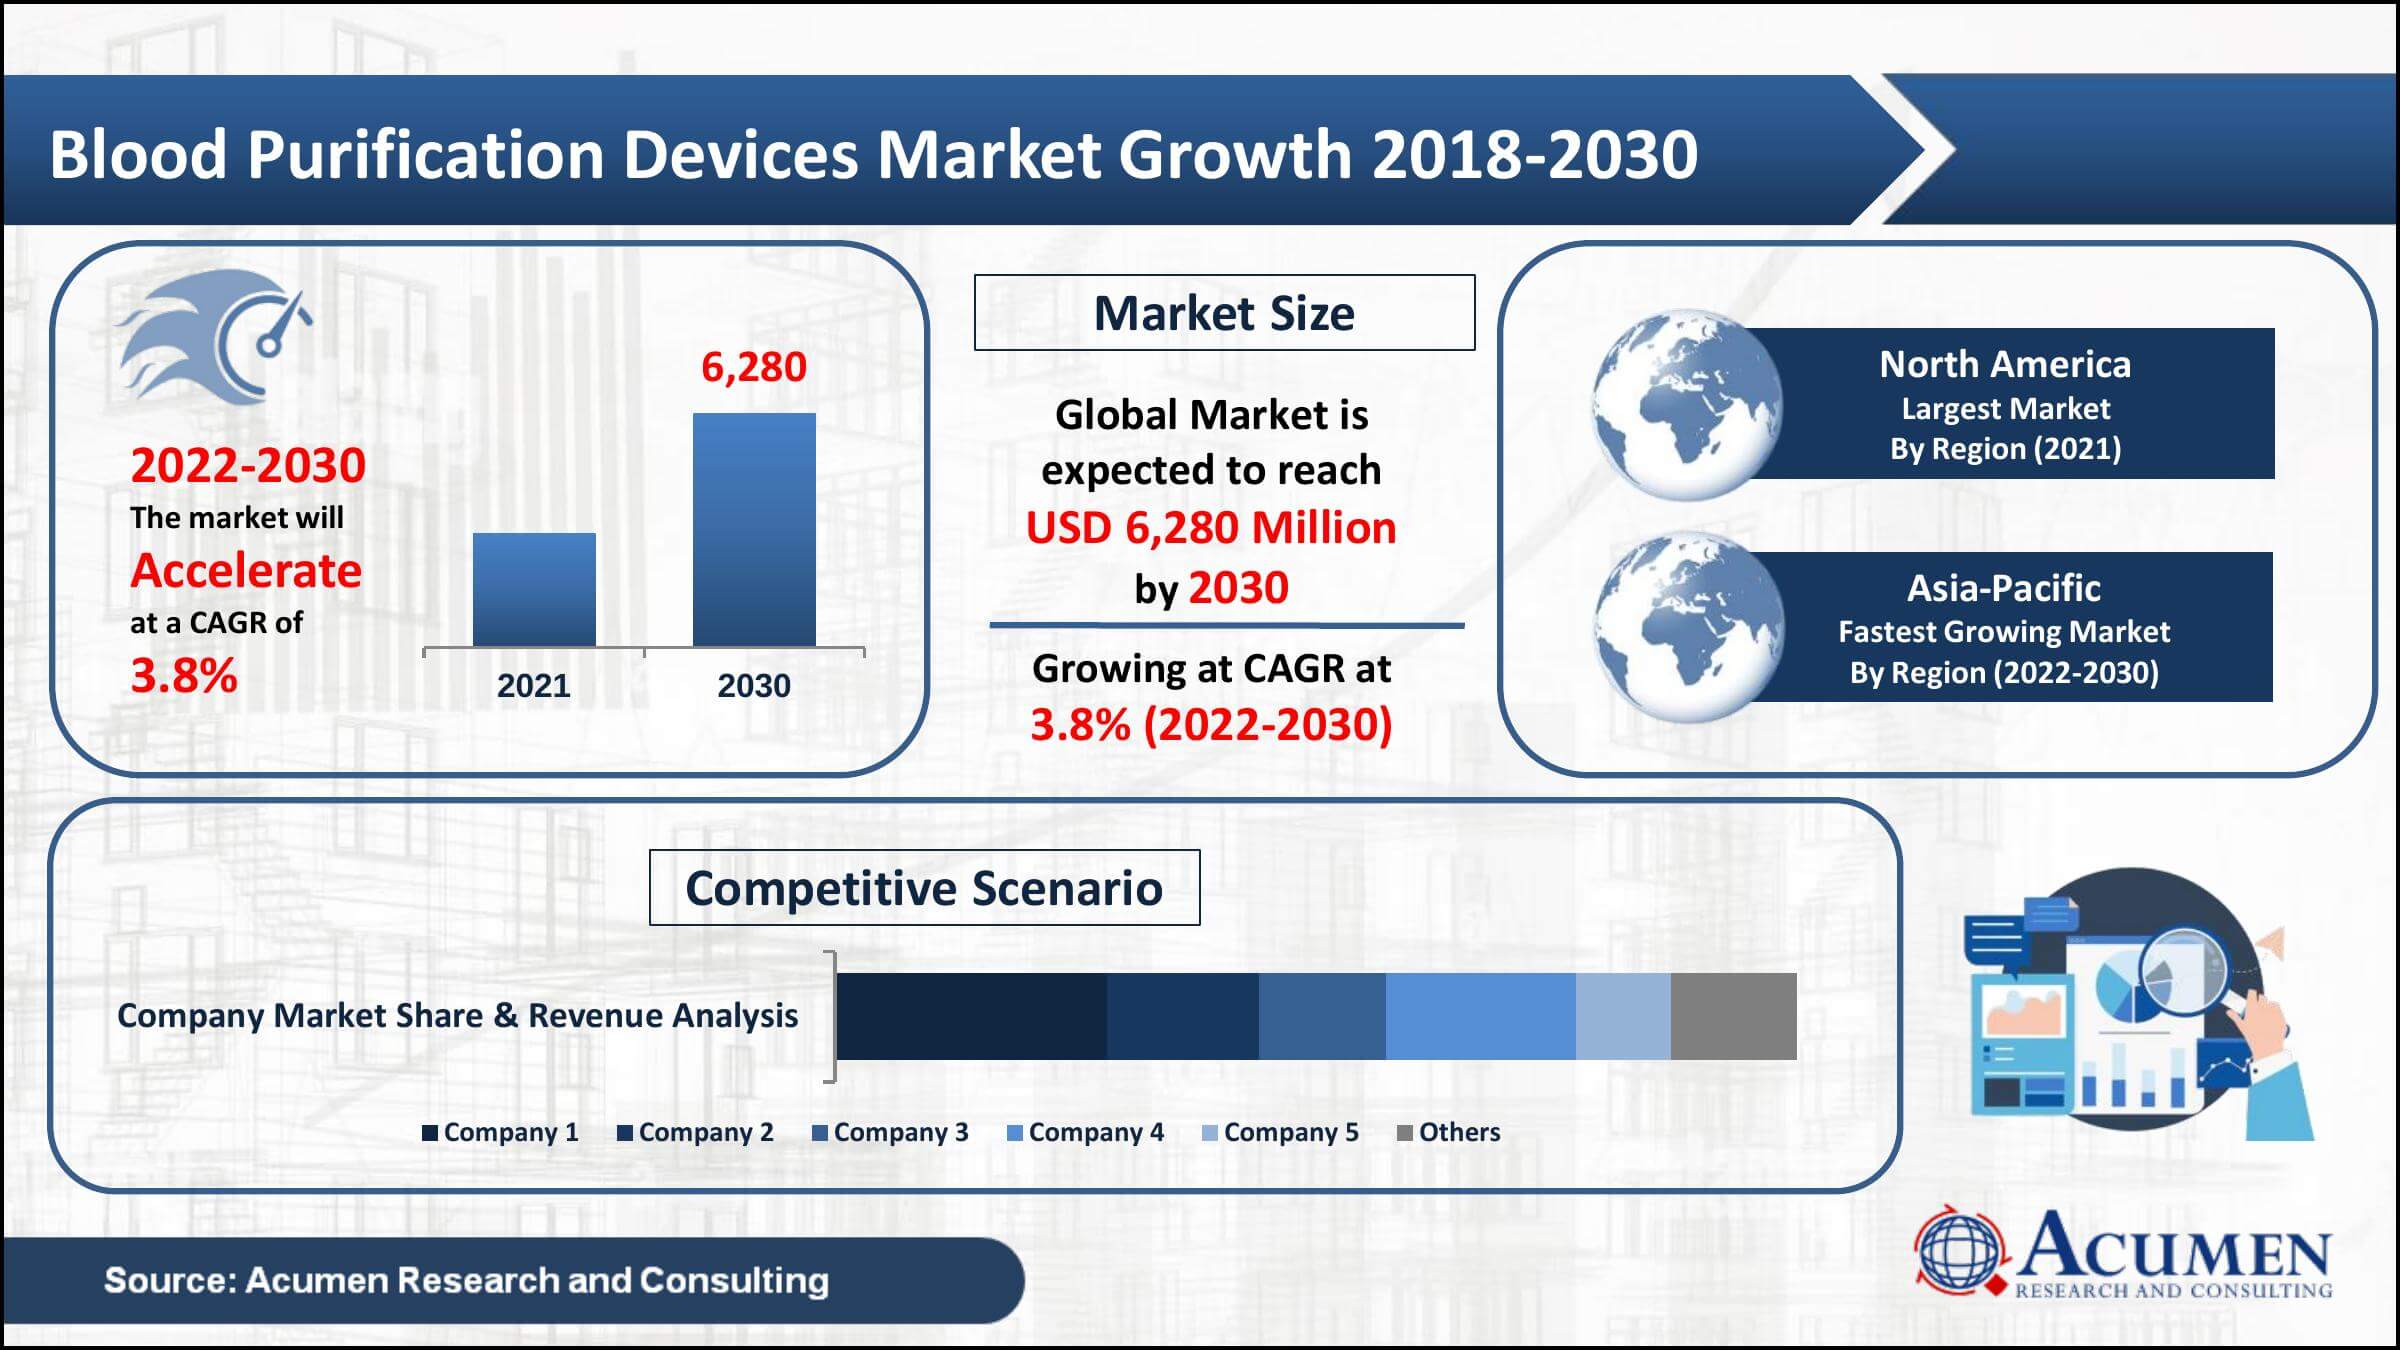 Global blood purification devices market value was worth USD 4.5 Billion in 2021, with a 3.8% CAGR between 2022 and 2030